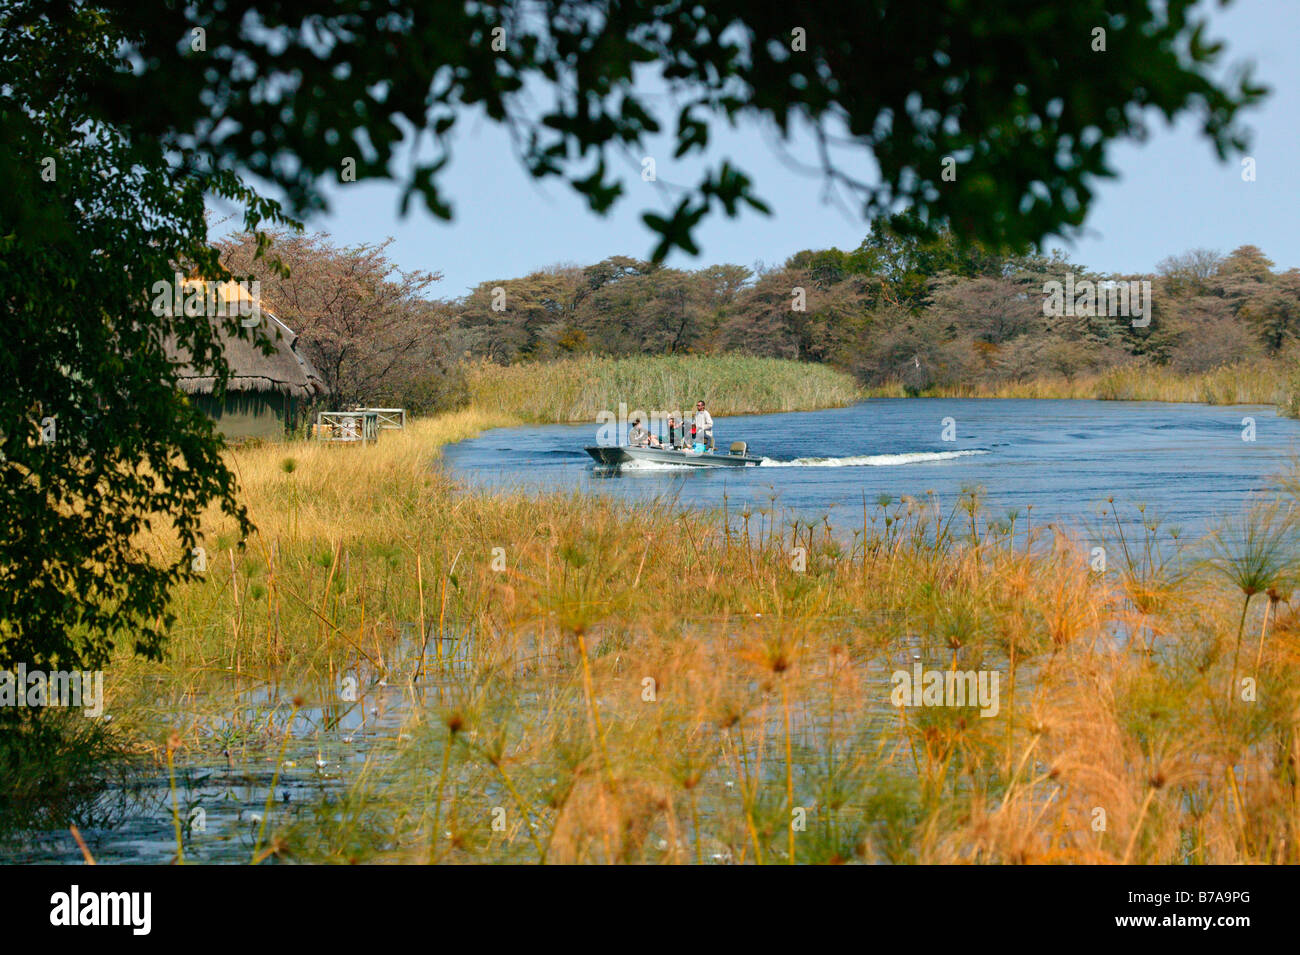 Tourists arrive at Camp Kwando after a boat ride on the Kwando River Stock Photo